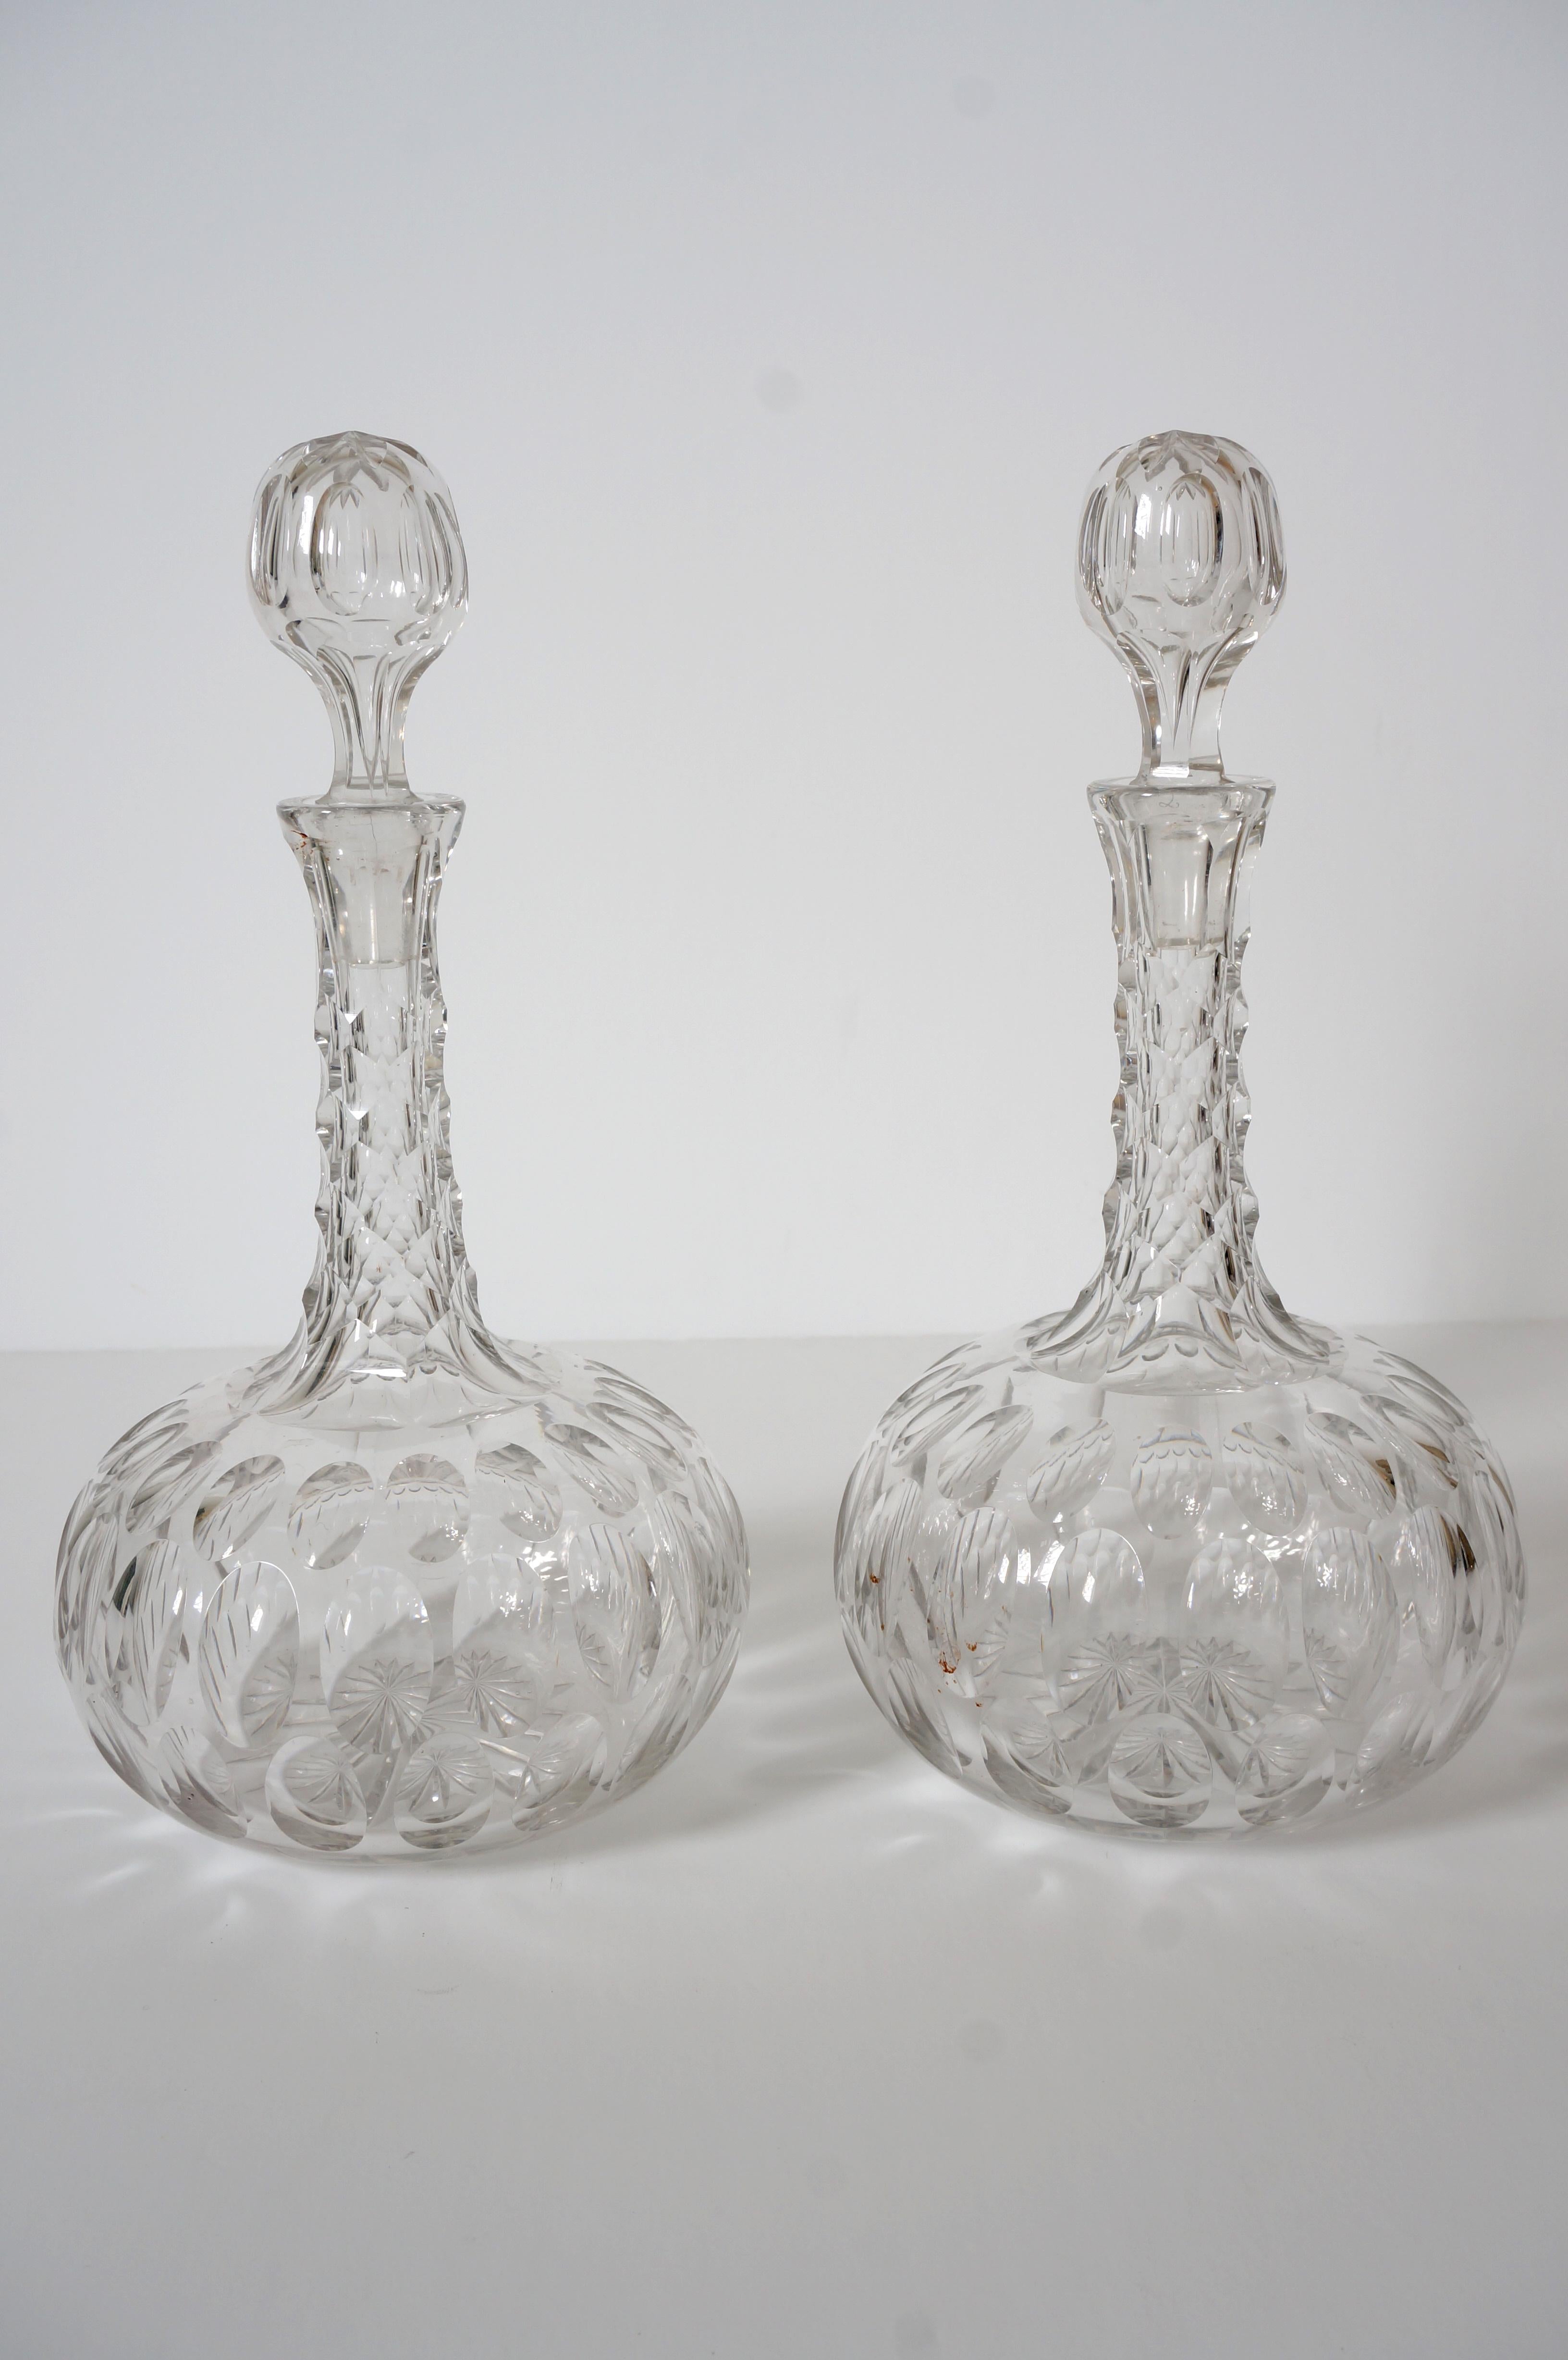 Set of Two Cut Crystal English Regency Style Decanters In Good Condition For Sale In West Palm Beach, FL